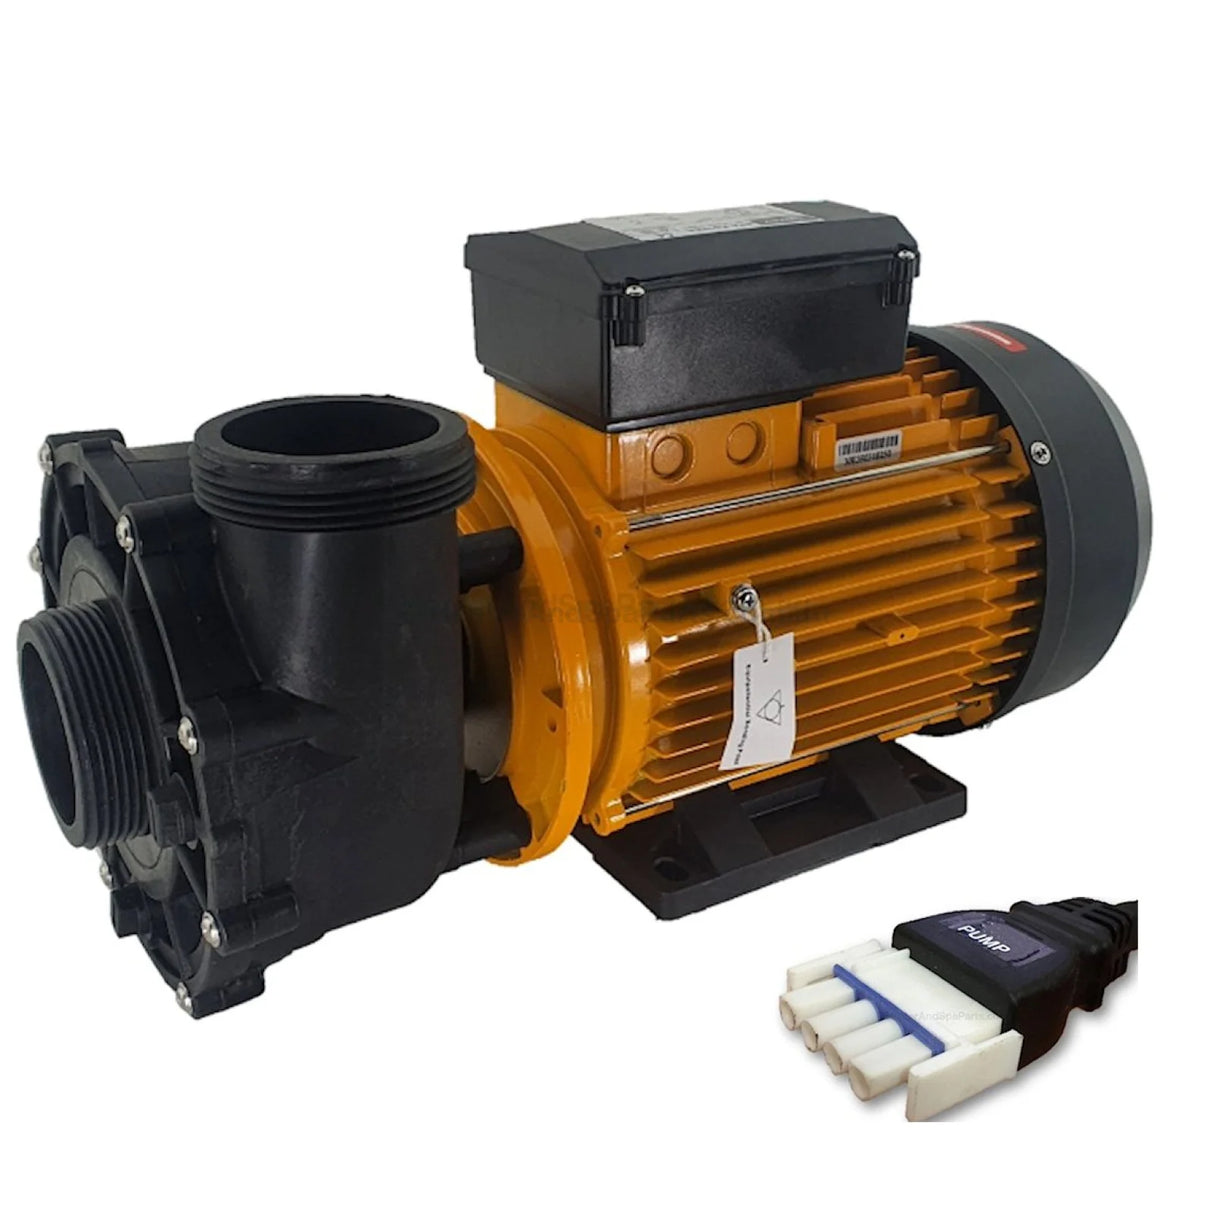 2.5Hp 2-Speed - Davey Spaquip Qb2502 Spa Jet Booster Pump 50Mm Overmoulded Amp Pumps